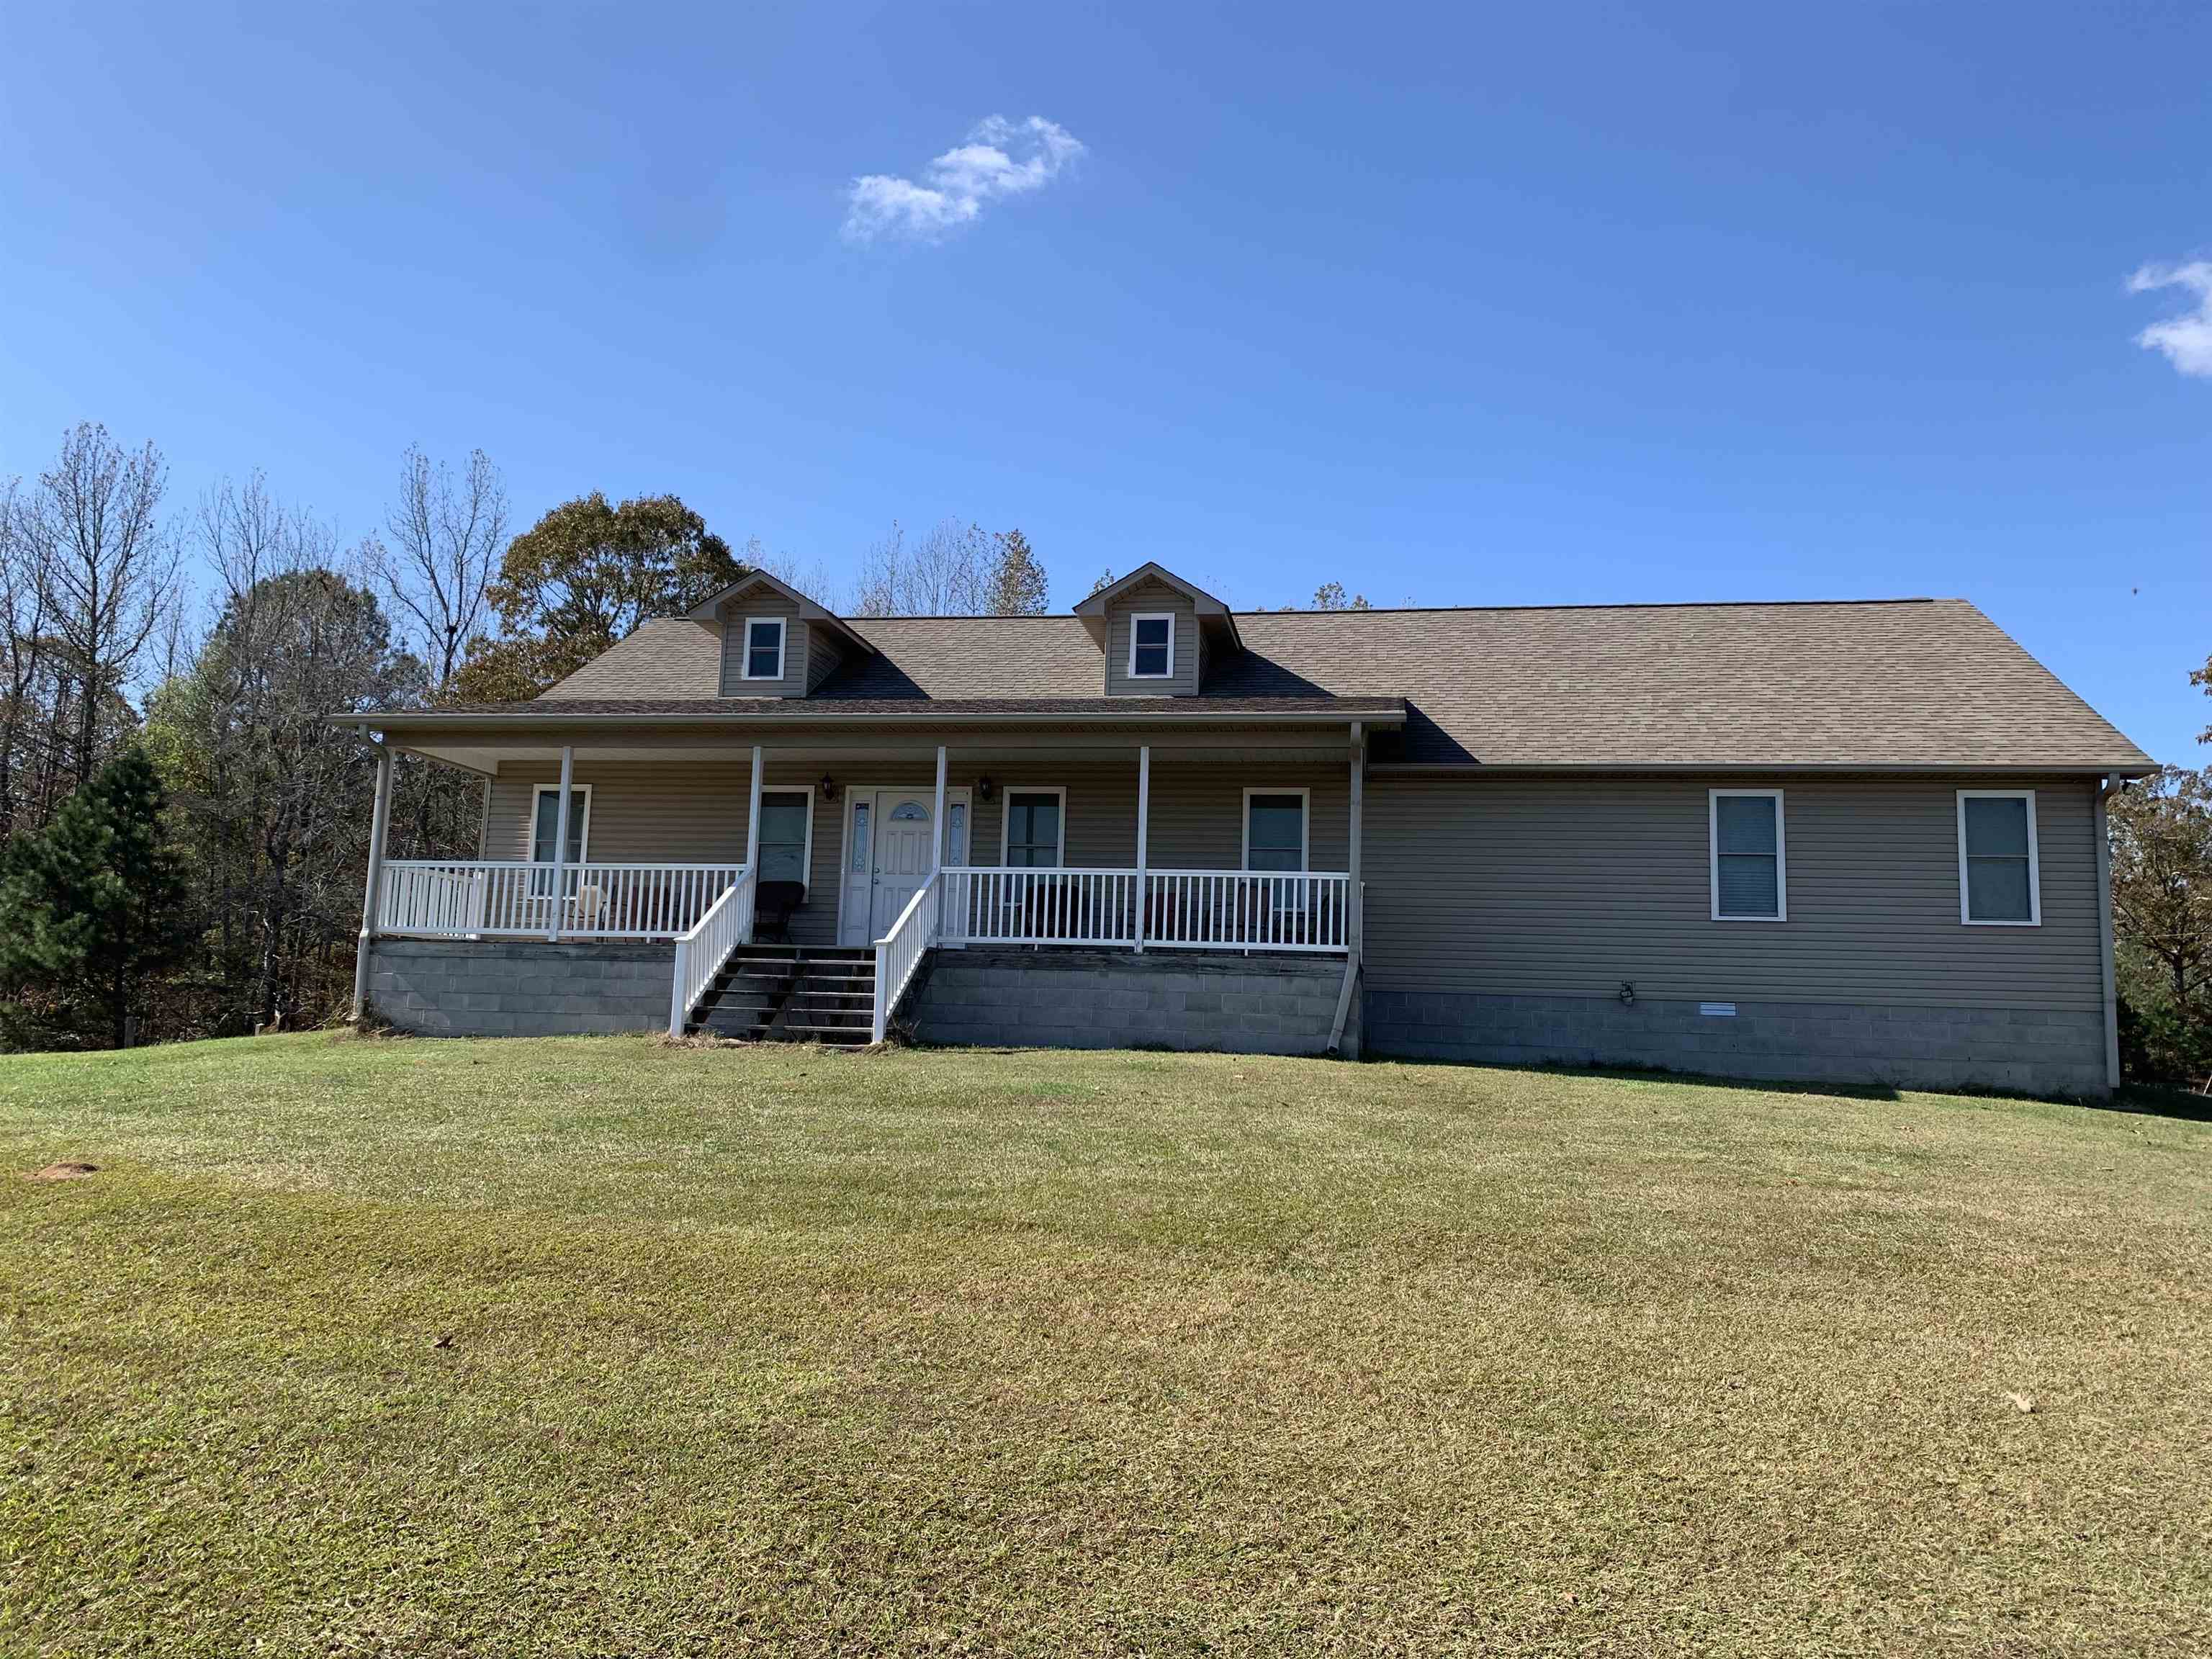 Absolutely amazing farm house on it's own slice of paradise.  This home is simple but solid.  Amy farmer or outdoor enthusiast would live to have this place.  45 +/- acres, 23 on sq. ft. home, and big barn to keep all equiptment.  Don't miss out, this one is for you!